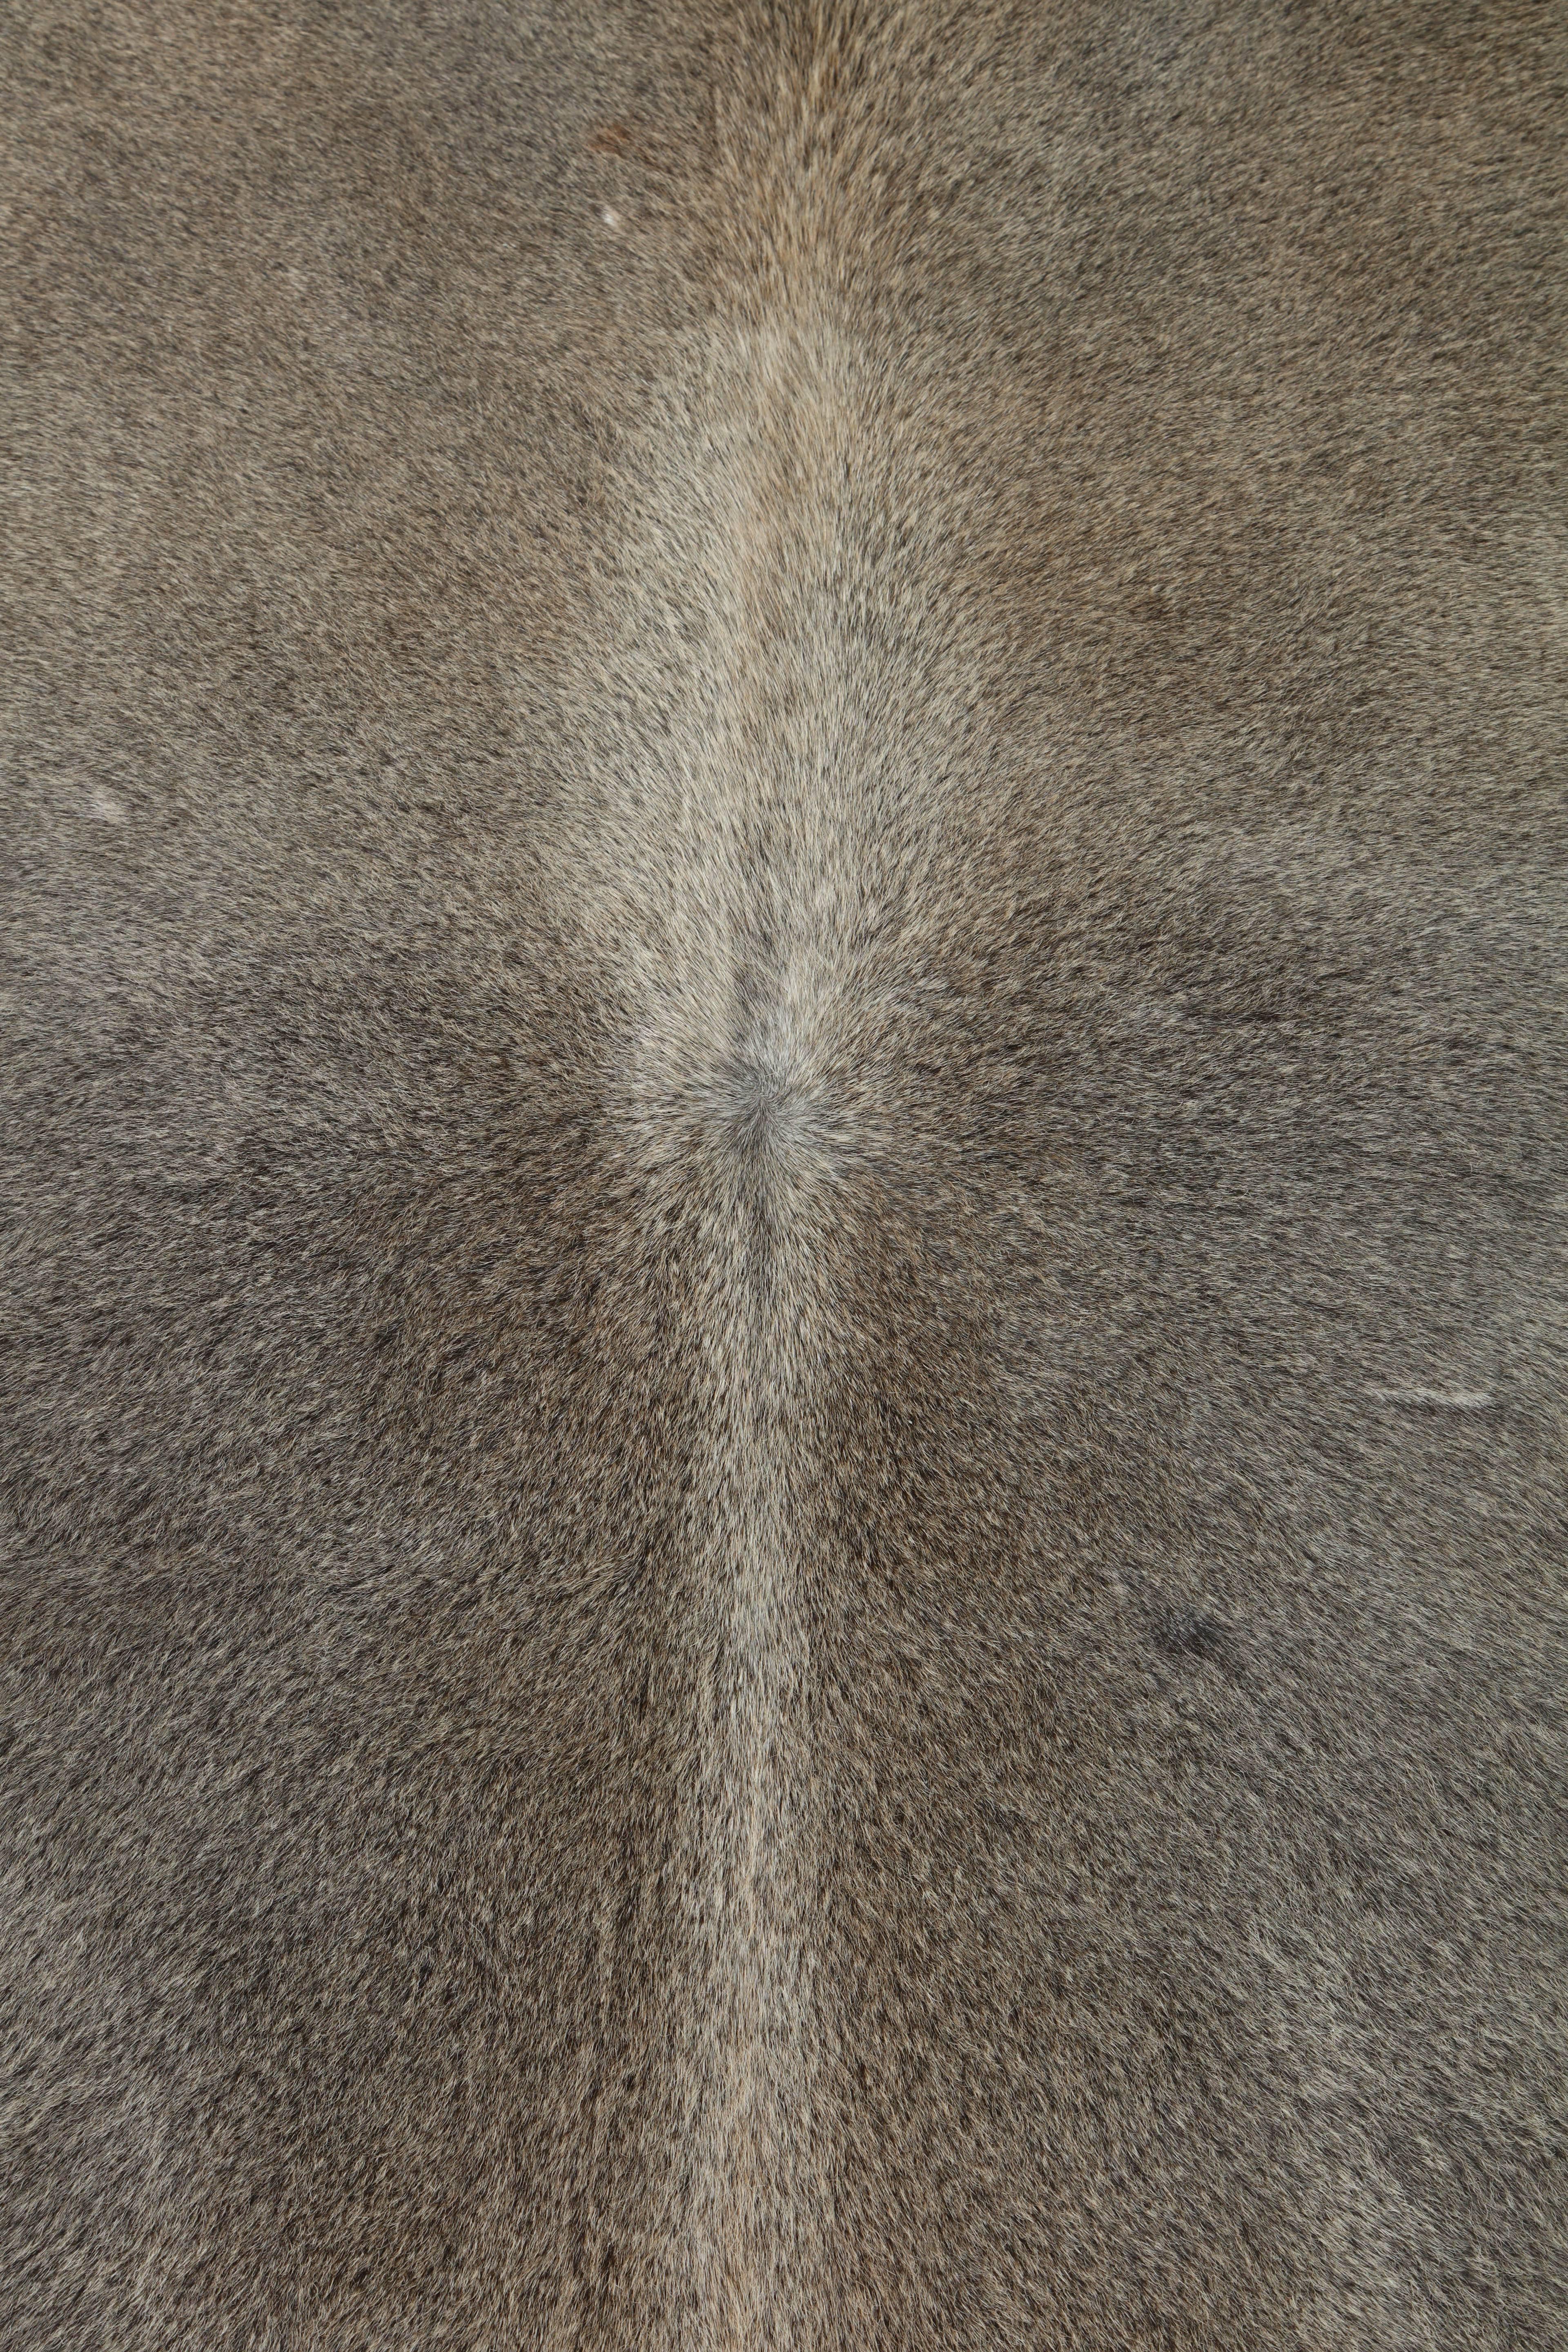 This contemporary gray Brazilian cowhide rug is made of 100% natural materials. Their tanneries are ISO-9001 certified for quality and ISO 14001 certified for low environmental impact which is what gives them their gold star rating from Leather